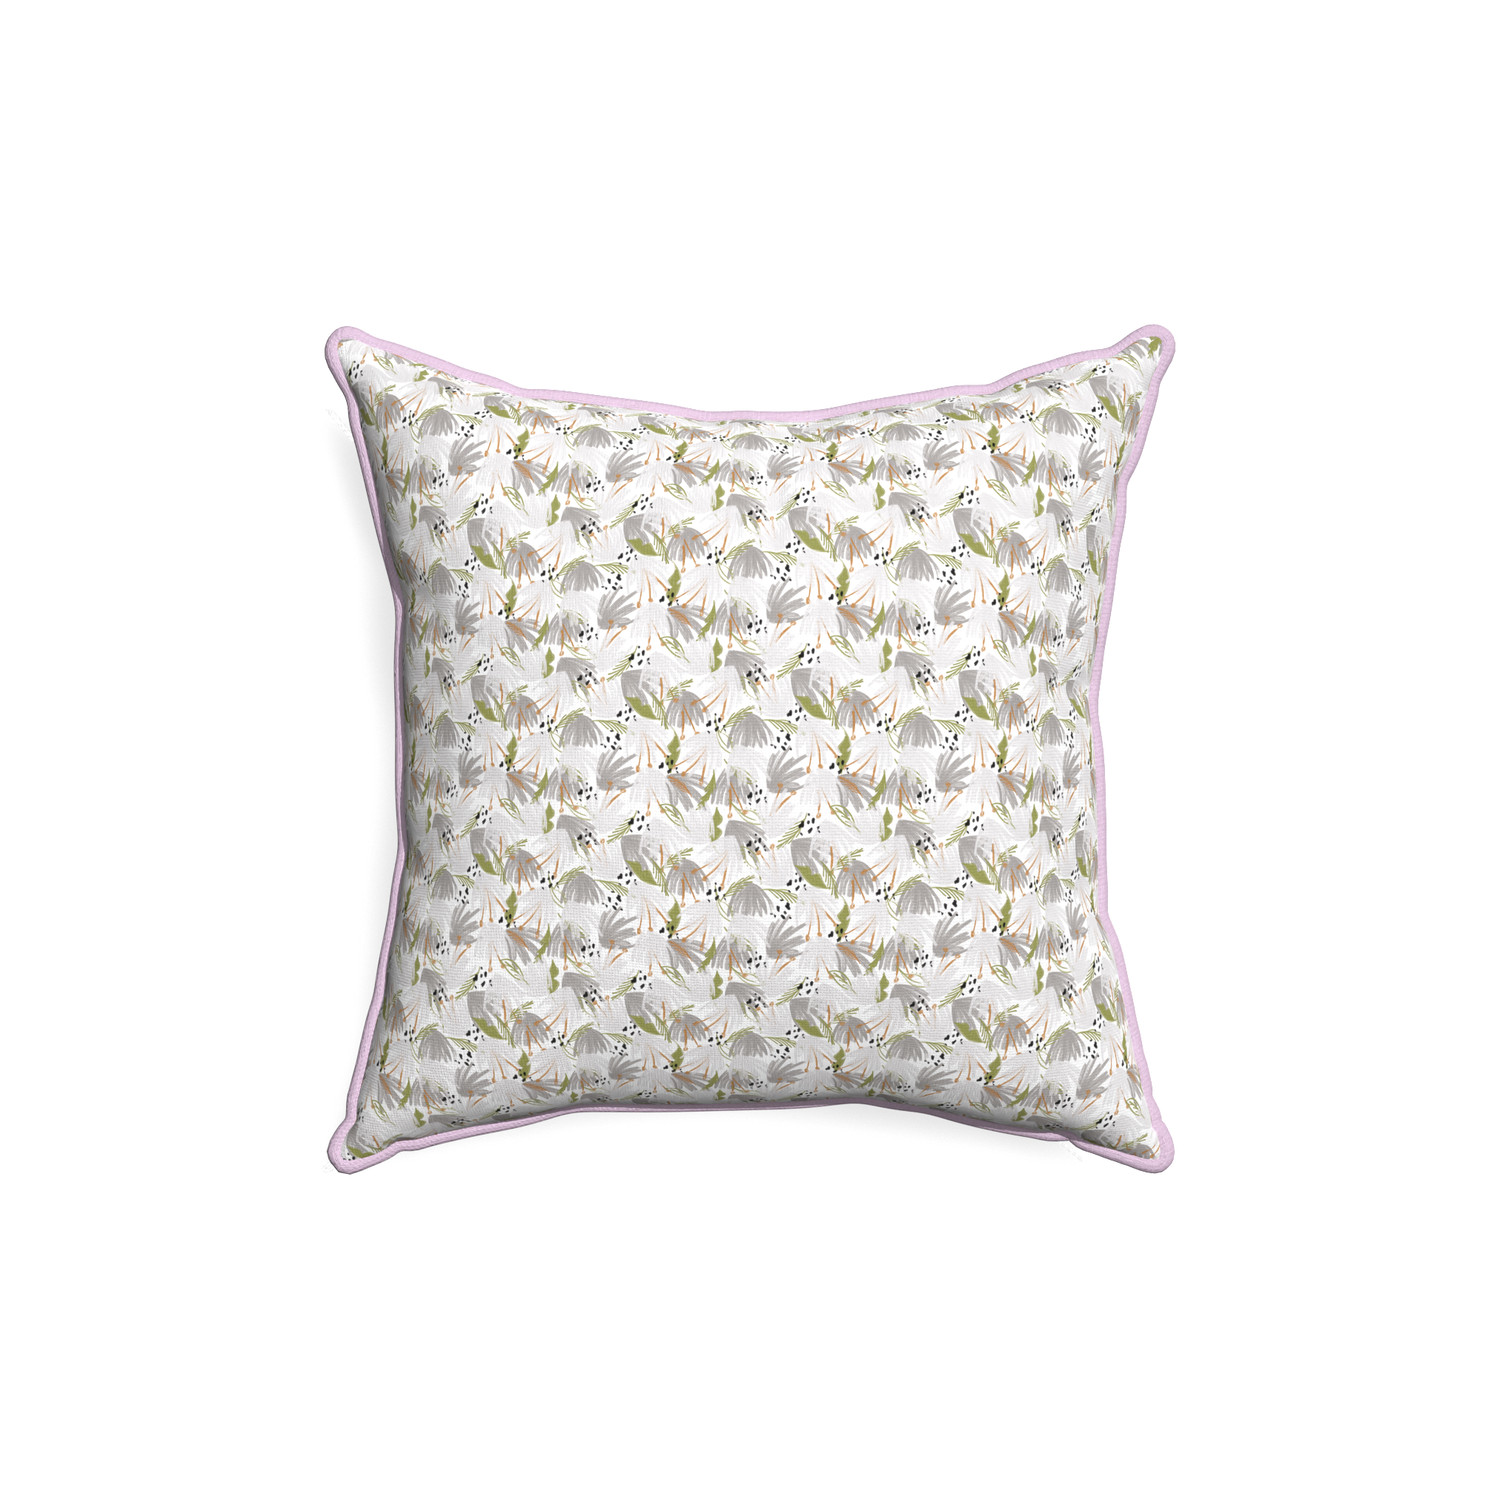 18-square eden grey custom pillow with l piping on white background